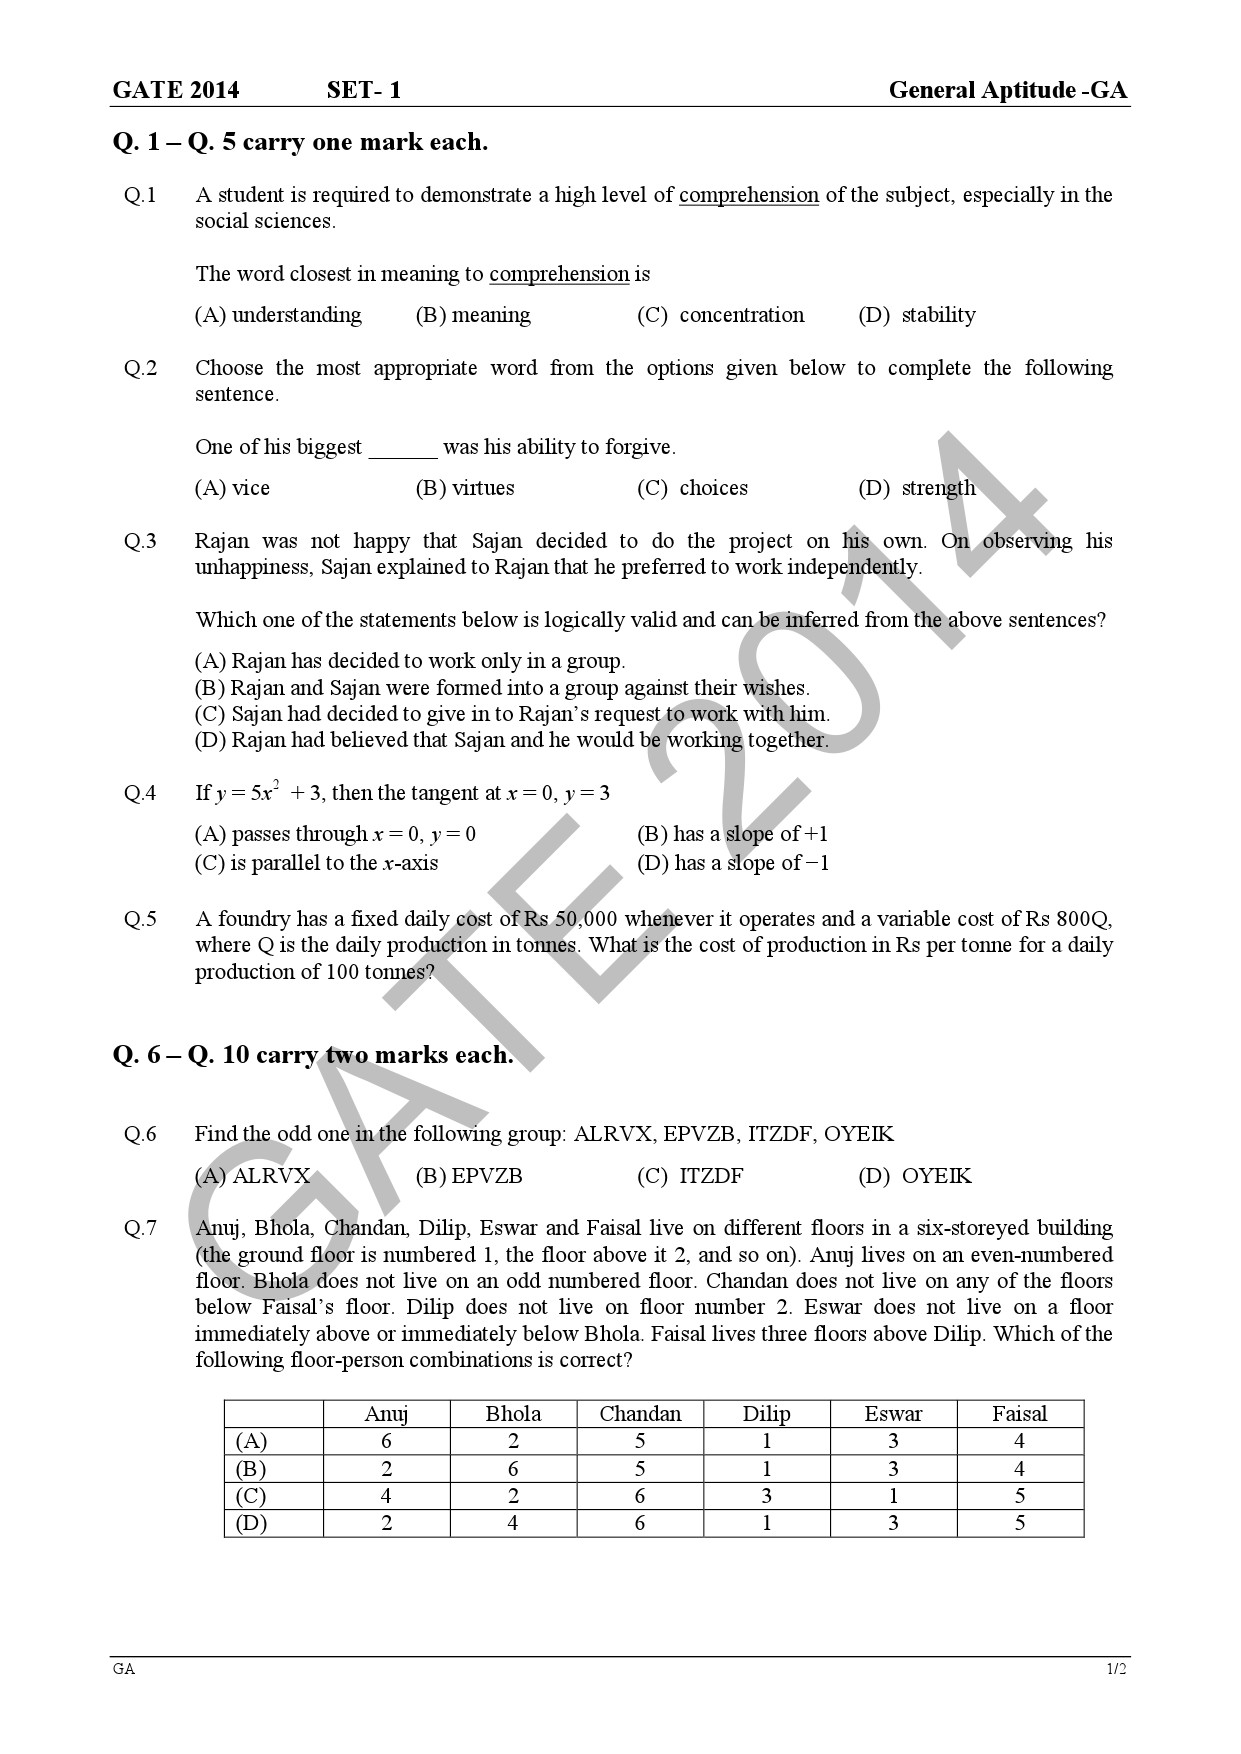 GATE Exam Question Paper 2014 Architecture and Planning 5